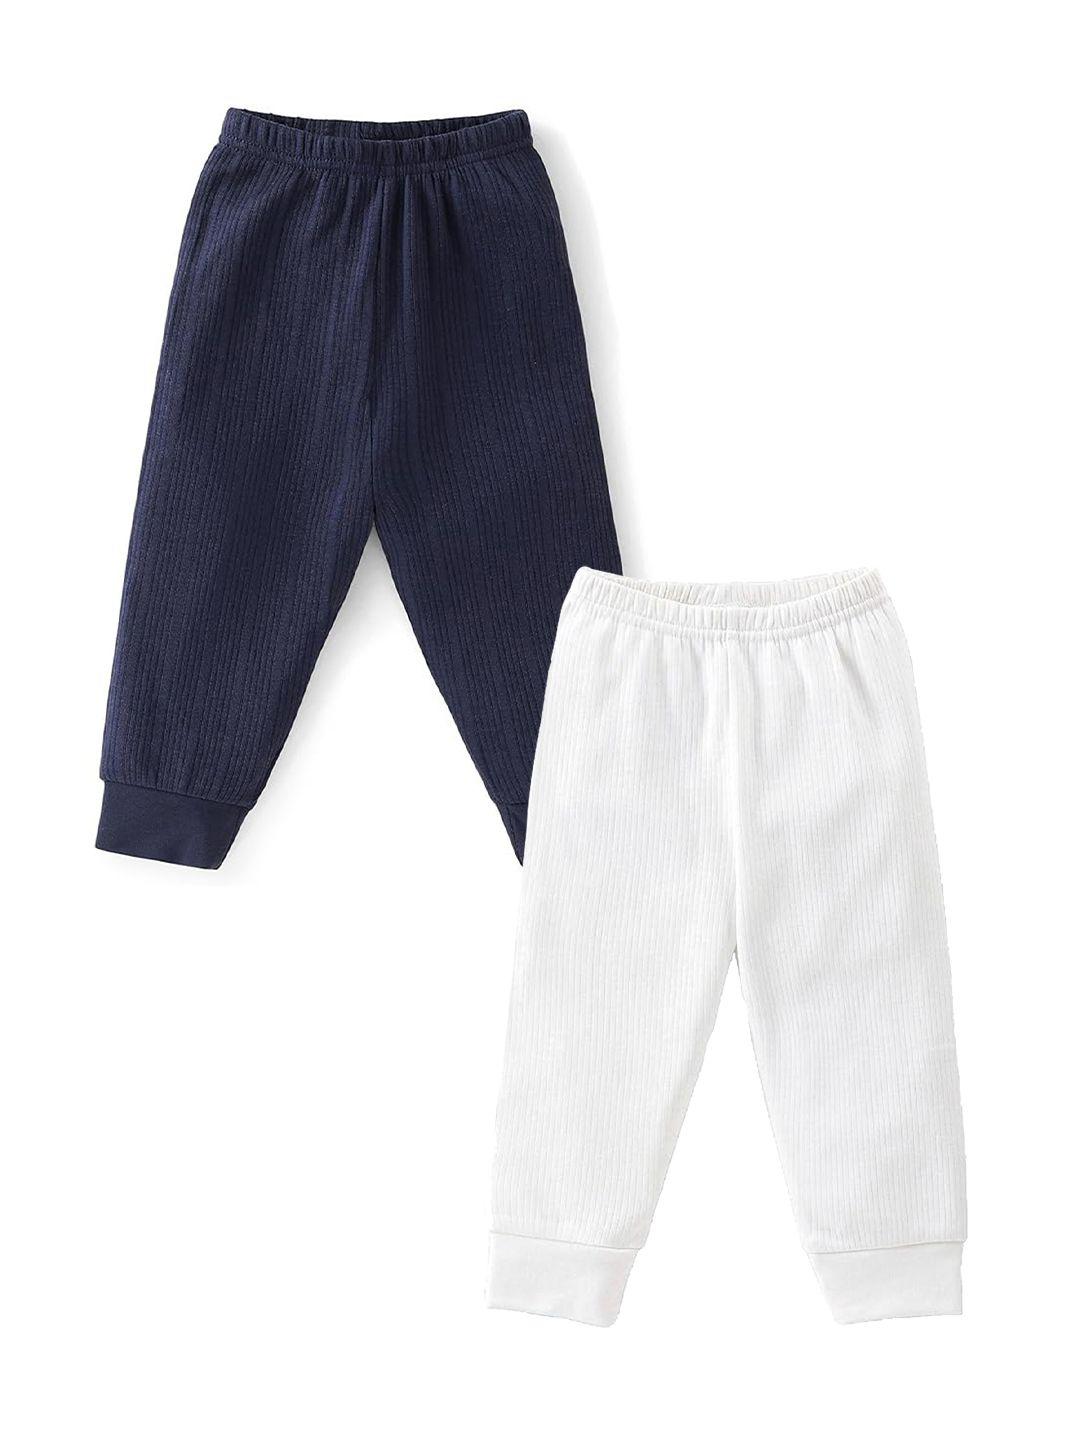 baesd kids pack of 2 cotton thermal bottoms